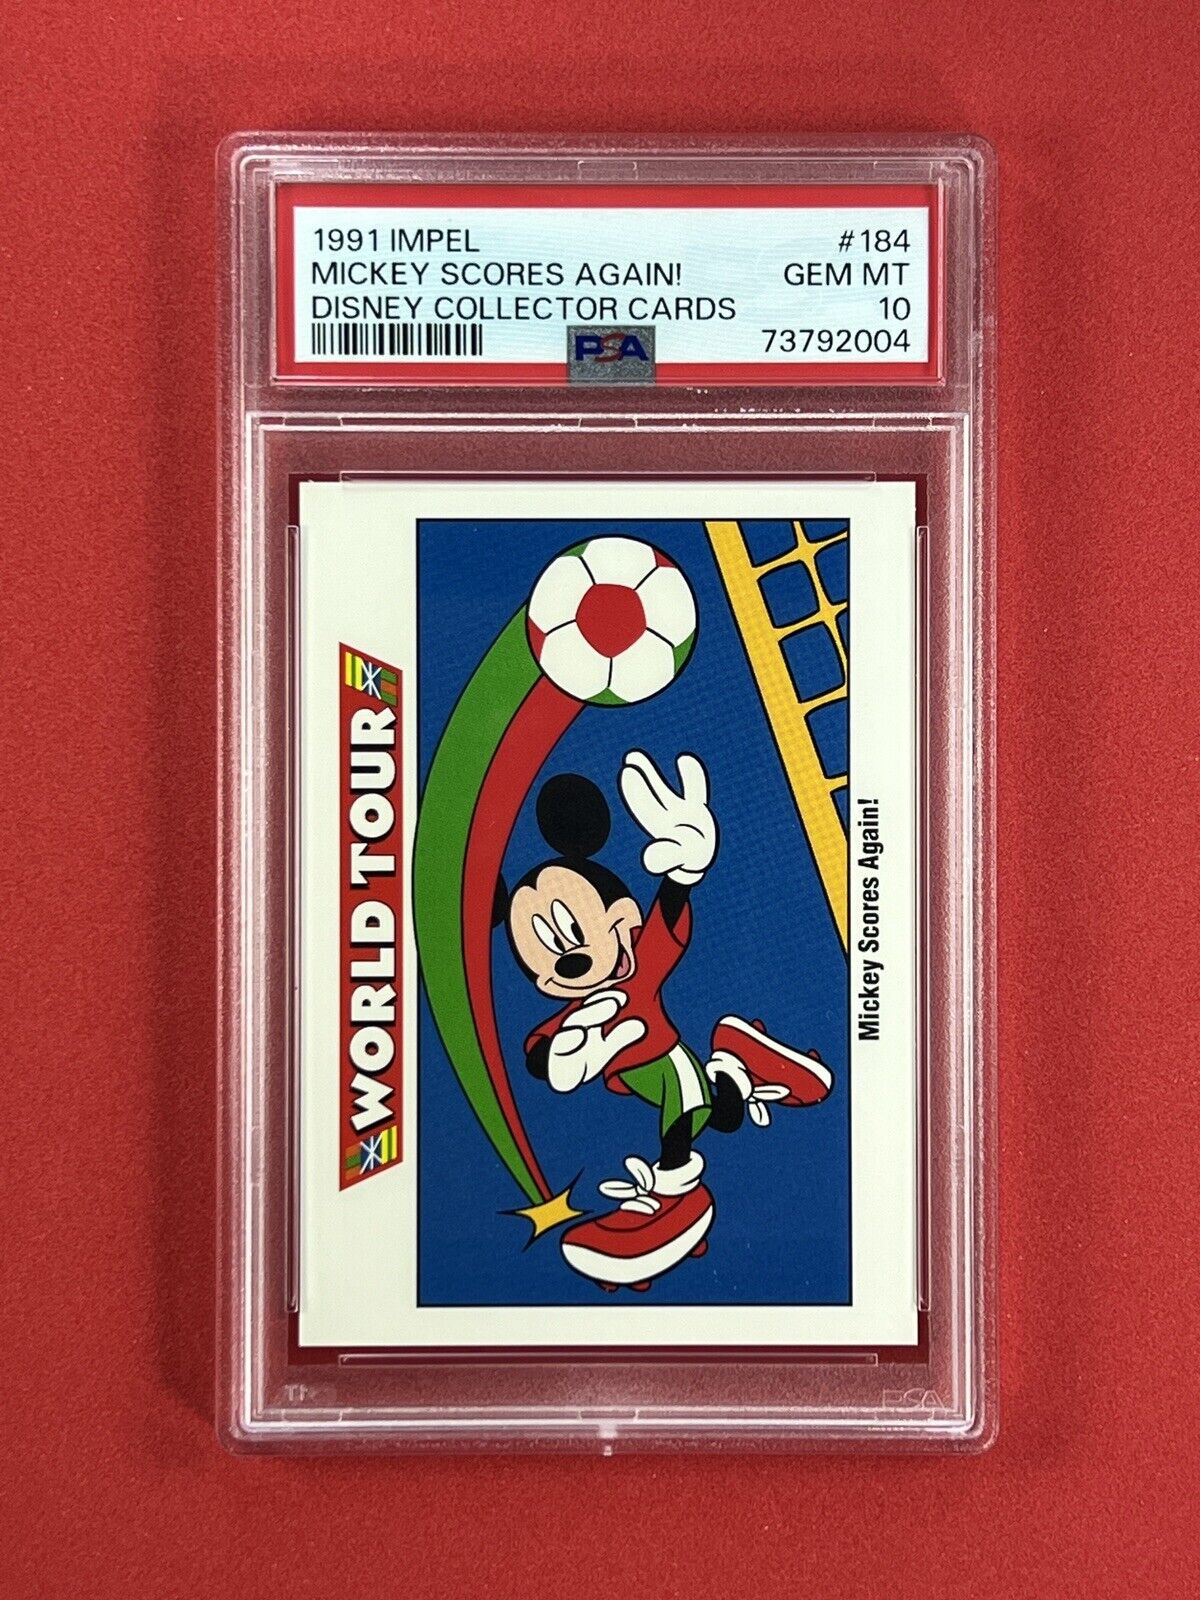 1991 Impel Disney Collector Cards #184 Mickey Mouse PSA 10 World Tour 